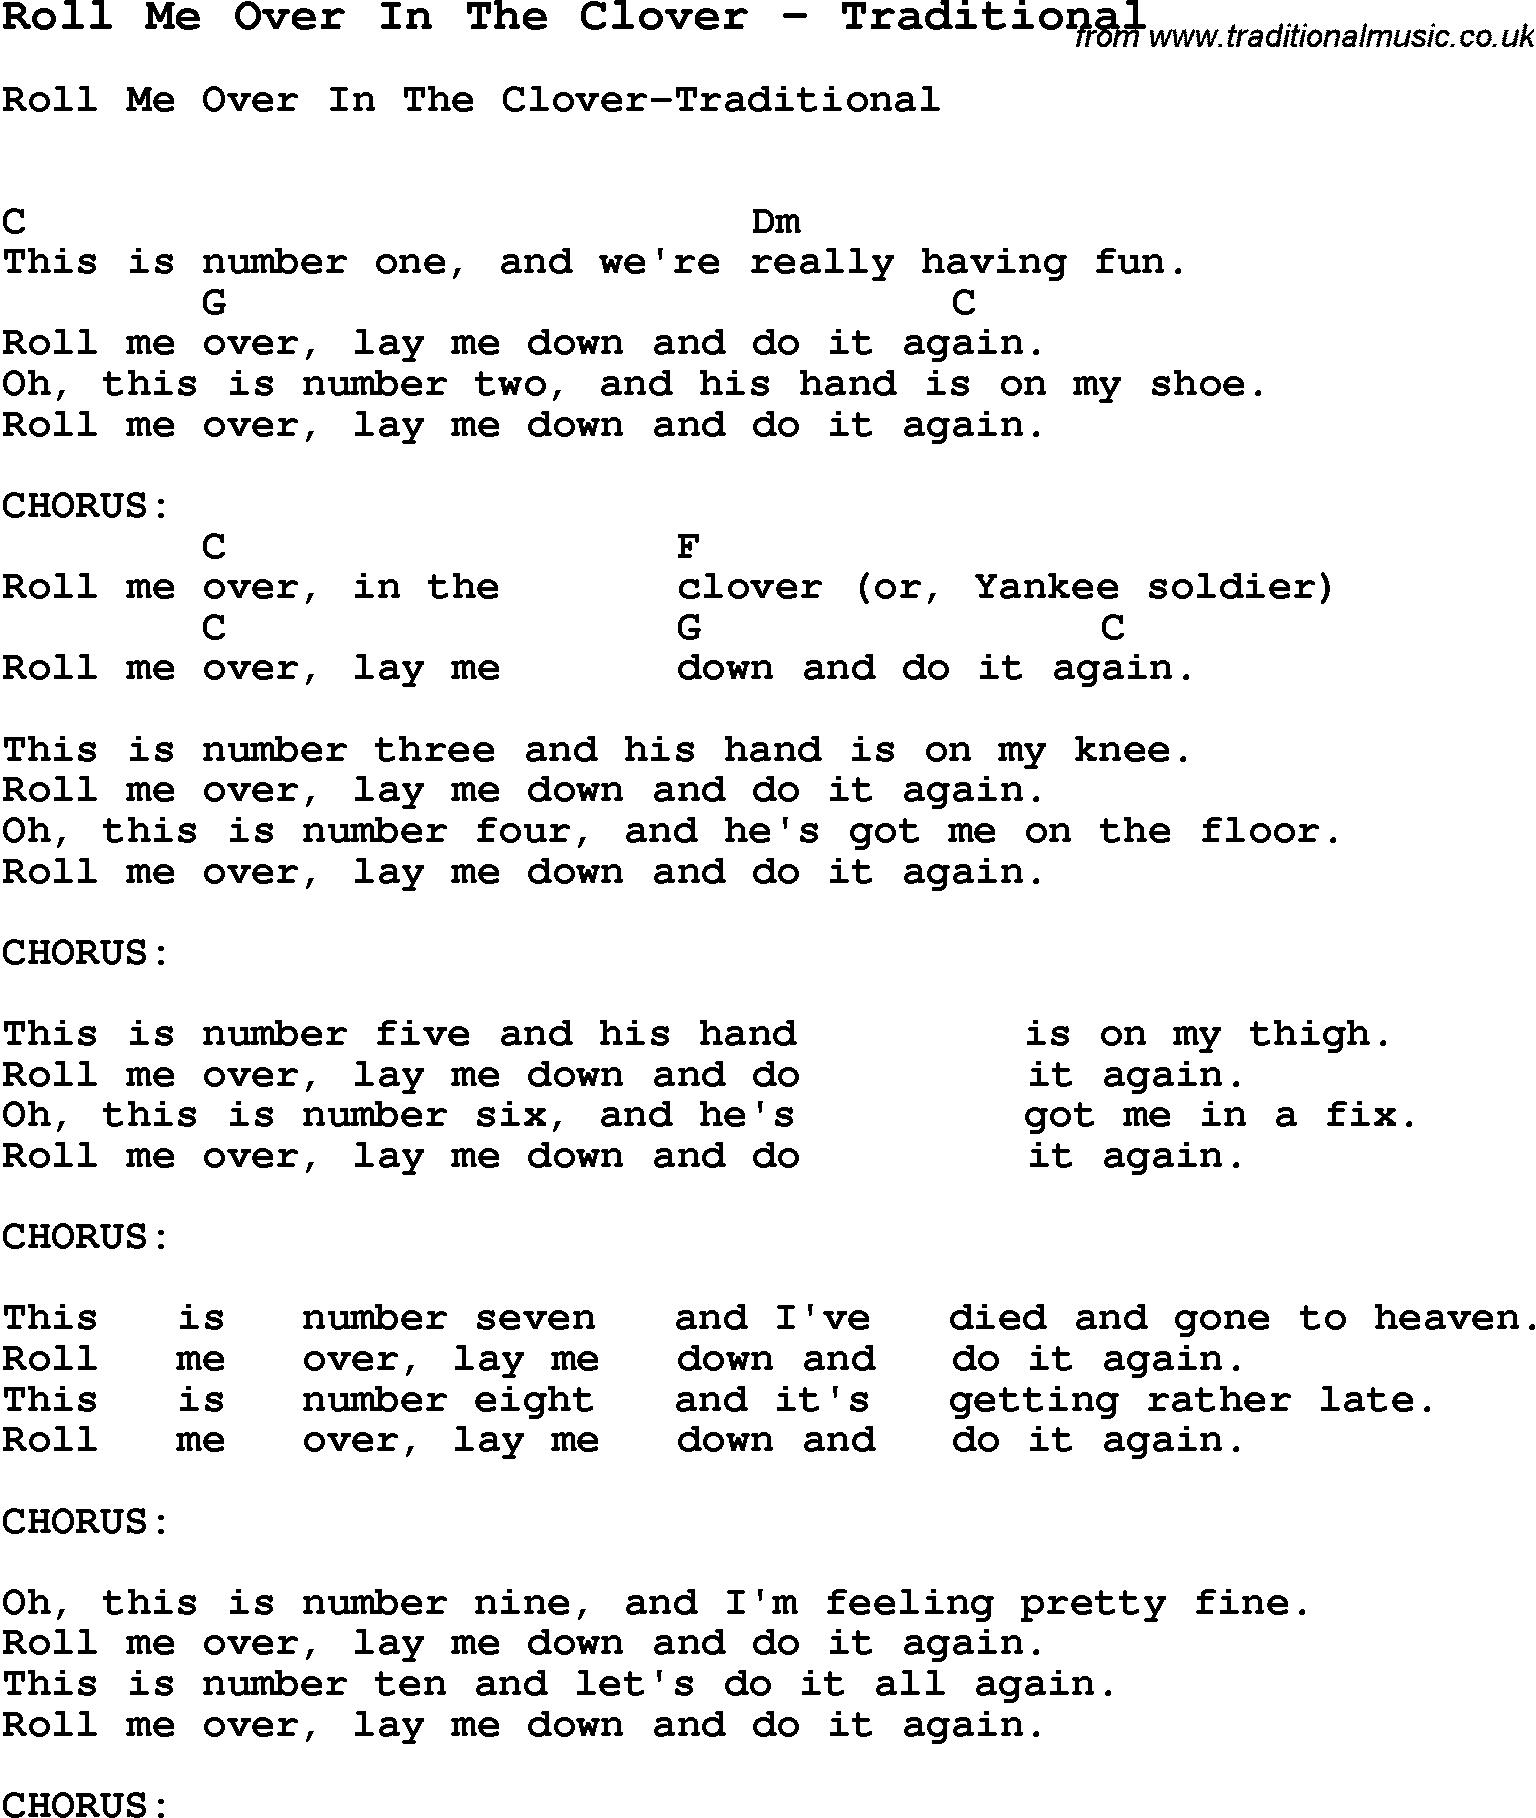 Song Roll Me Over In The Clover by Traditional, with lyrics for vocal performance and accompaniment chords for Ukulele, Guitar Banjo etc.